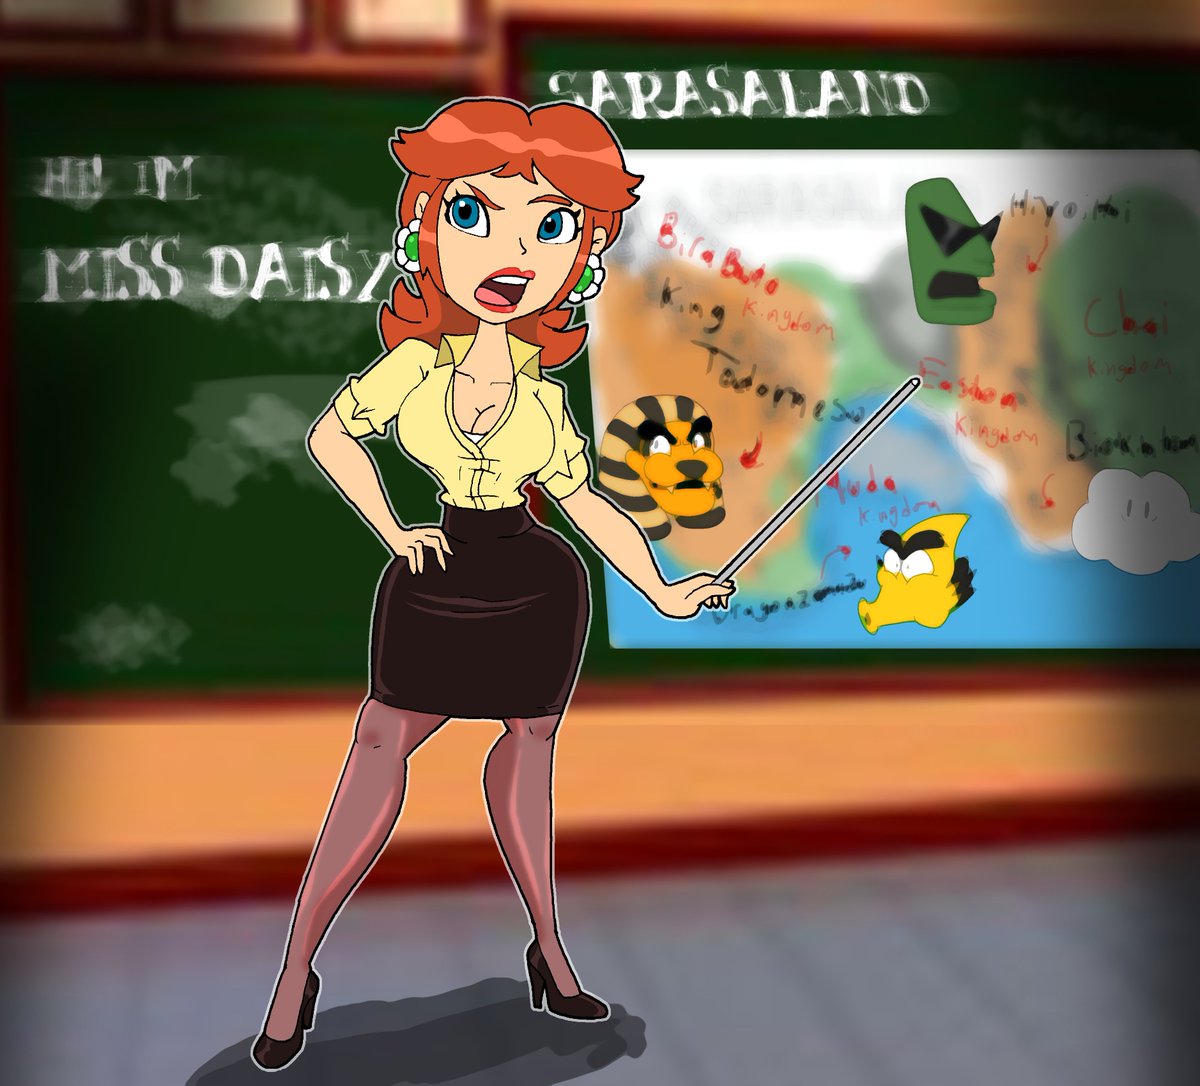 Suit-tember aint restricted on profession, which means Daisy herself can join and have a lil flexibility.
Hopefully SOME people learn Sarassaland's more than a desert this way!

#myart #PrincessDaisy #fanart #Suittember #teacher #skirtsuit #SuperMario #ArtistOnTwitter #design